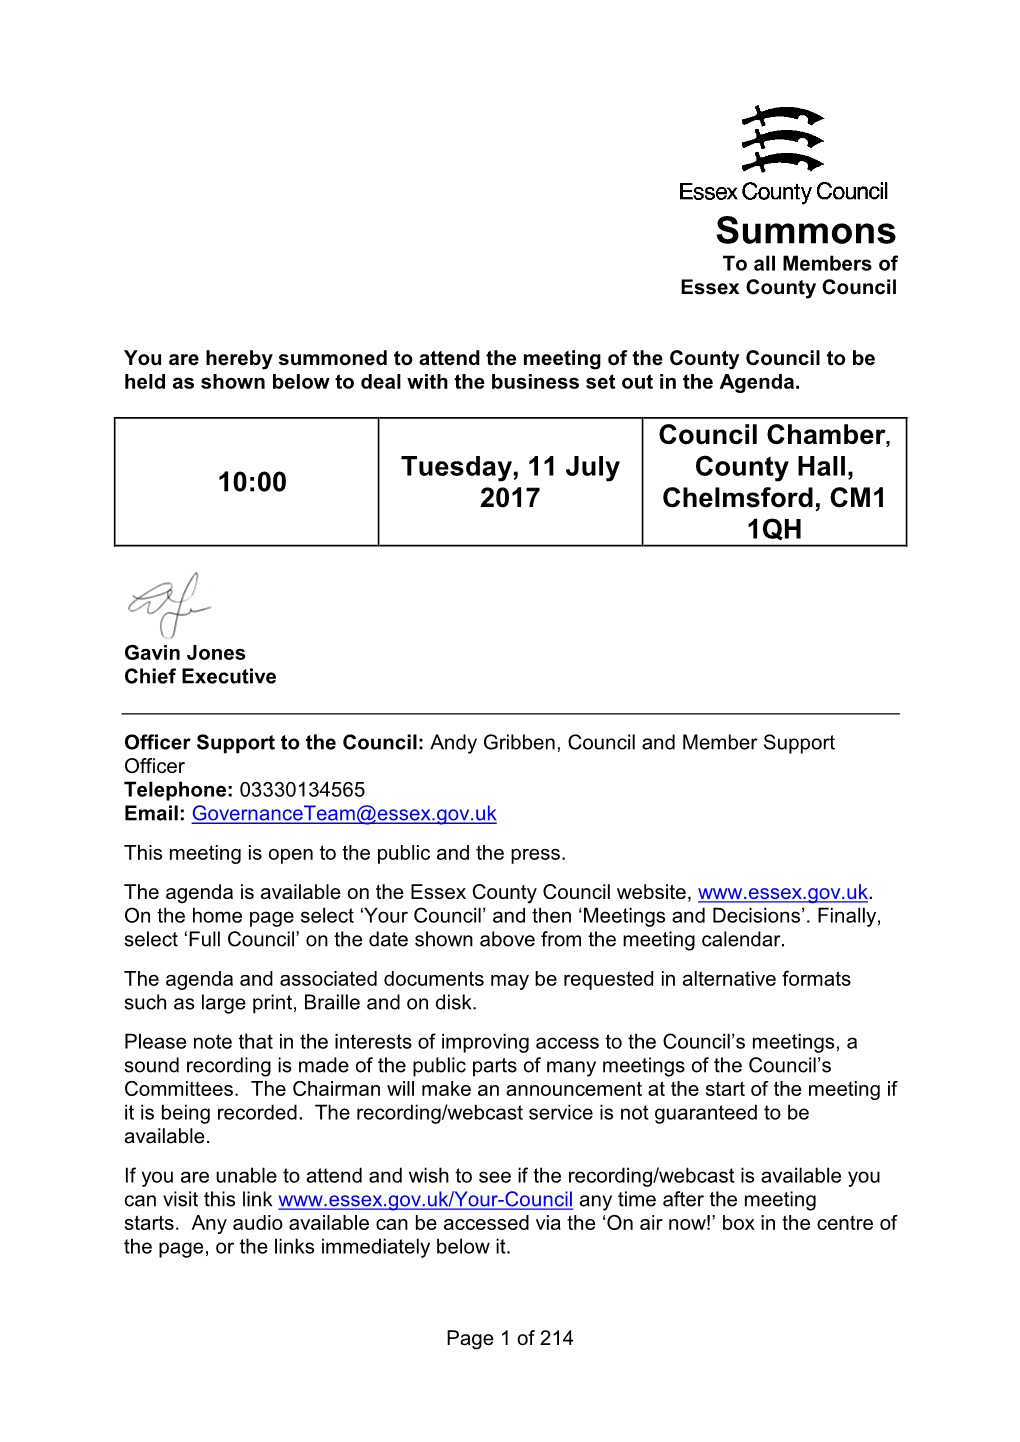 Summons to All Members of Essex County Council